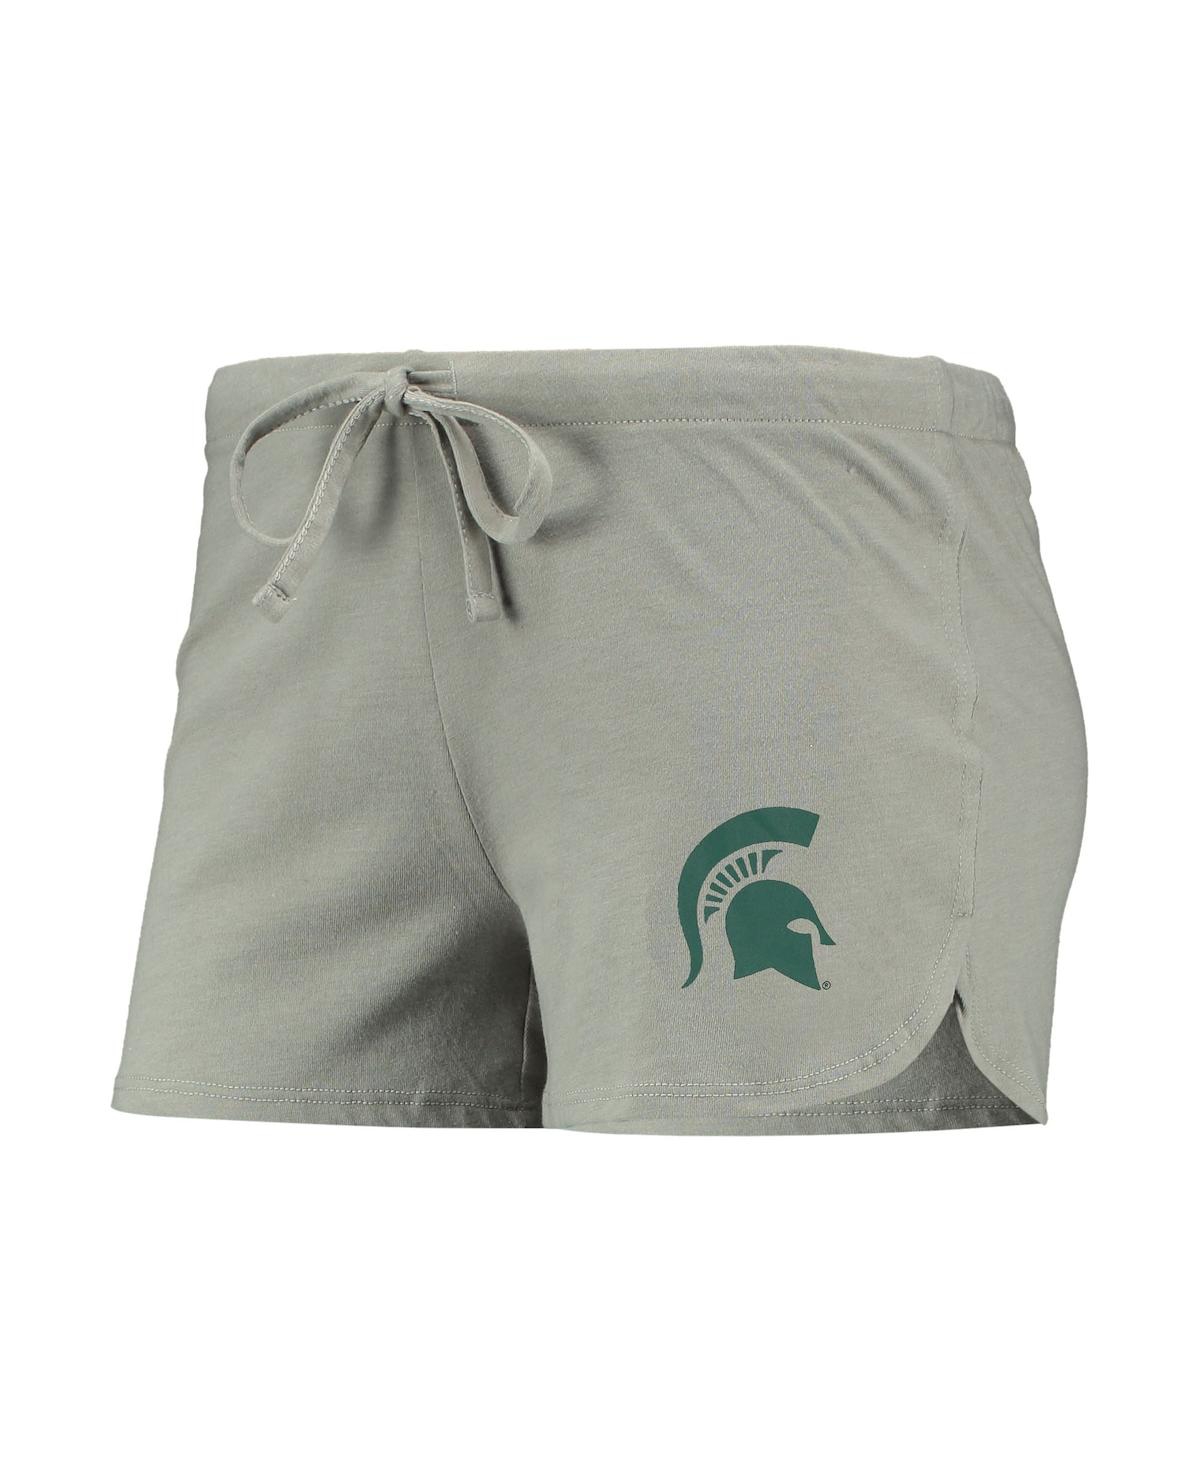 Shop Concepts Sport Women's  Green, Gray Michigan State Spartans Raglan Long Sleeve T-shirt And Shorts Sle In Green,gray